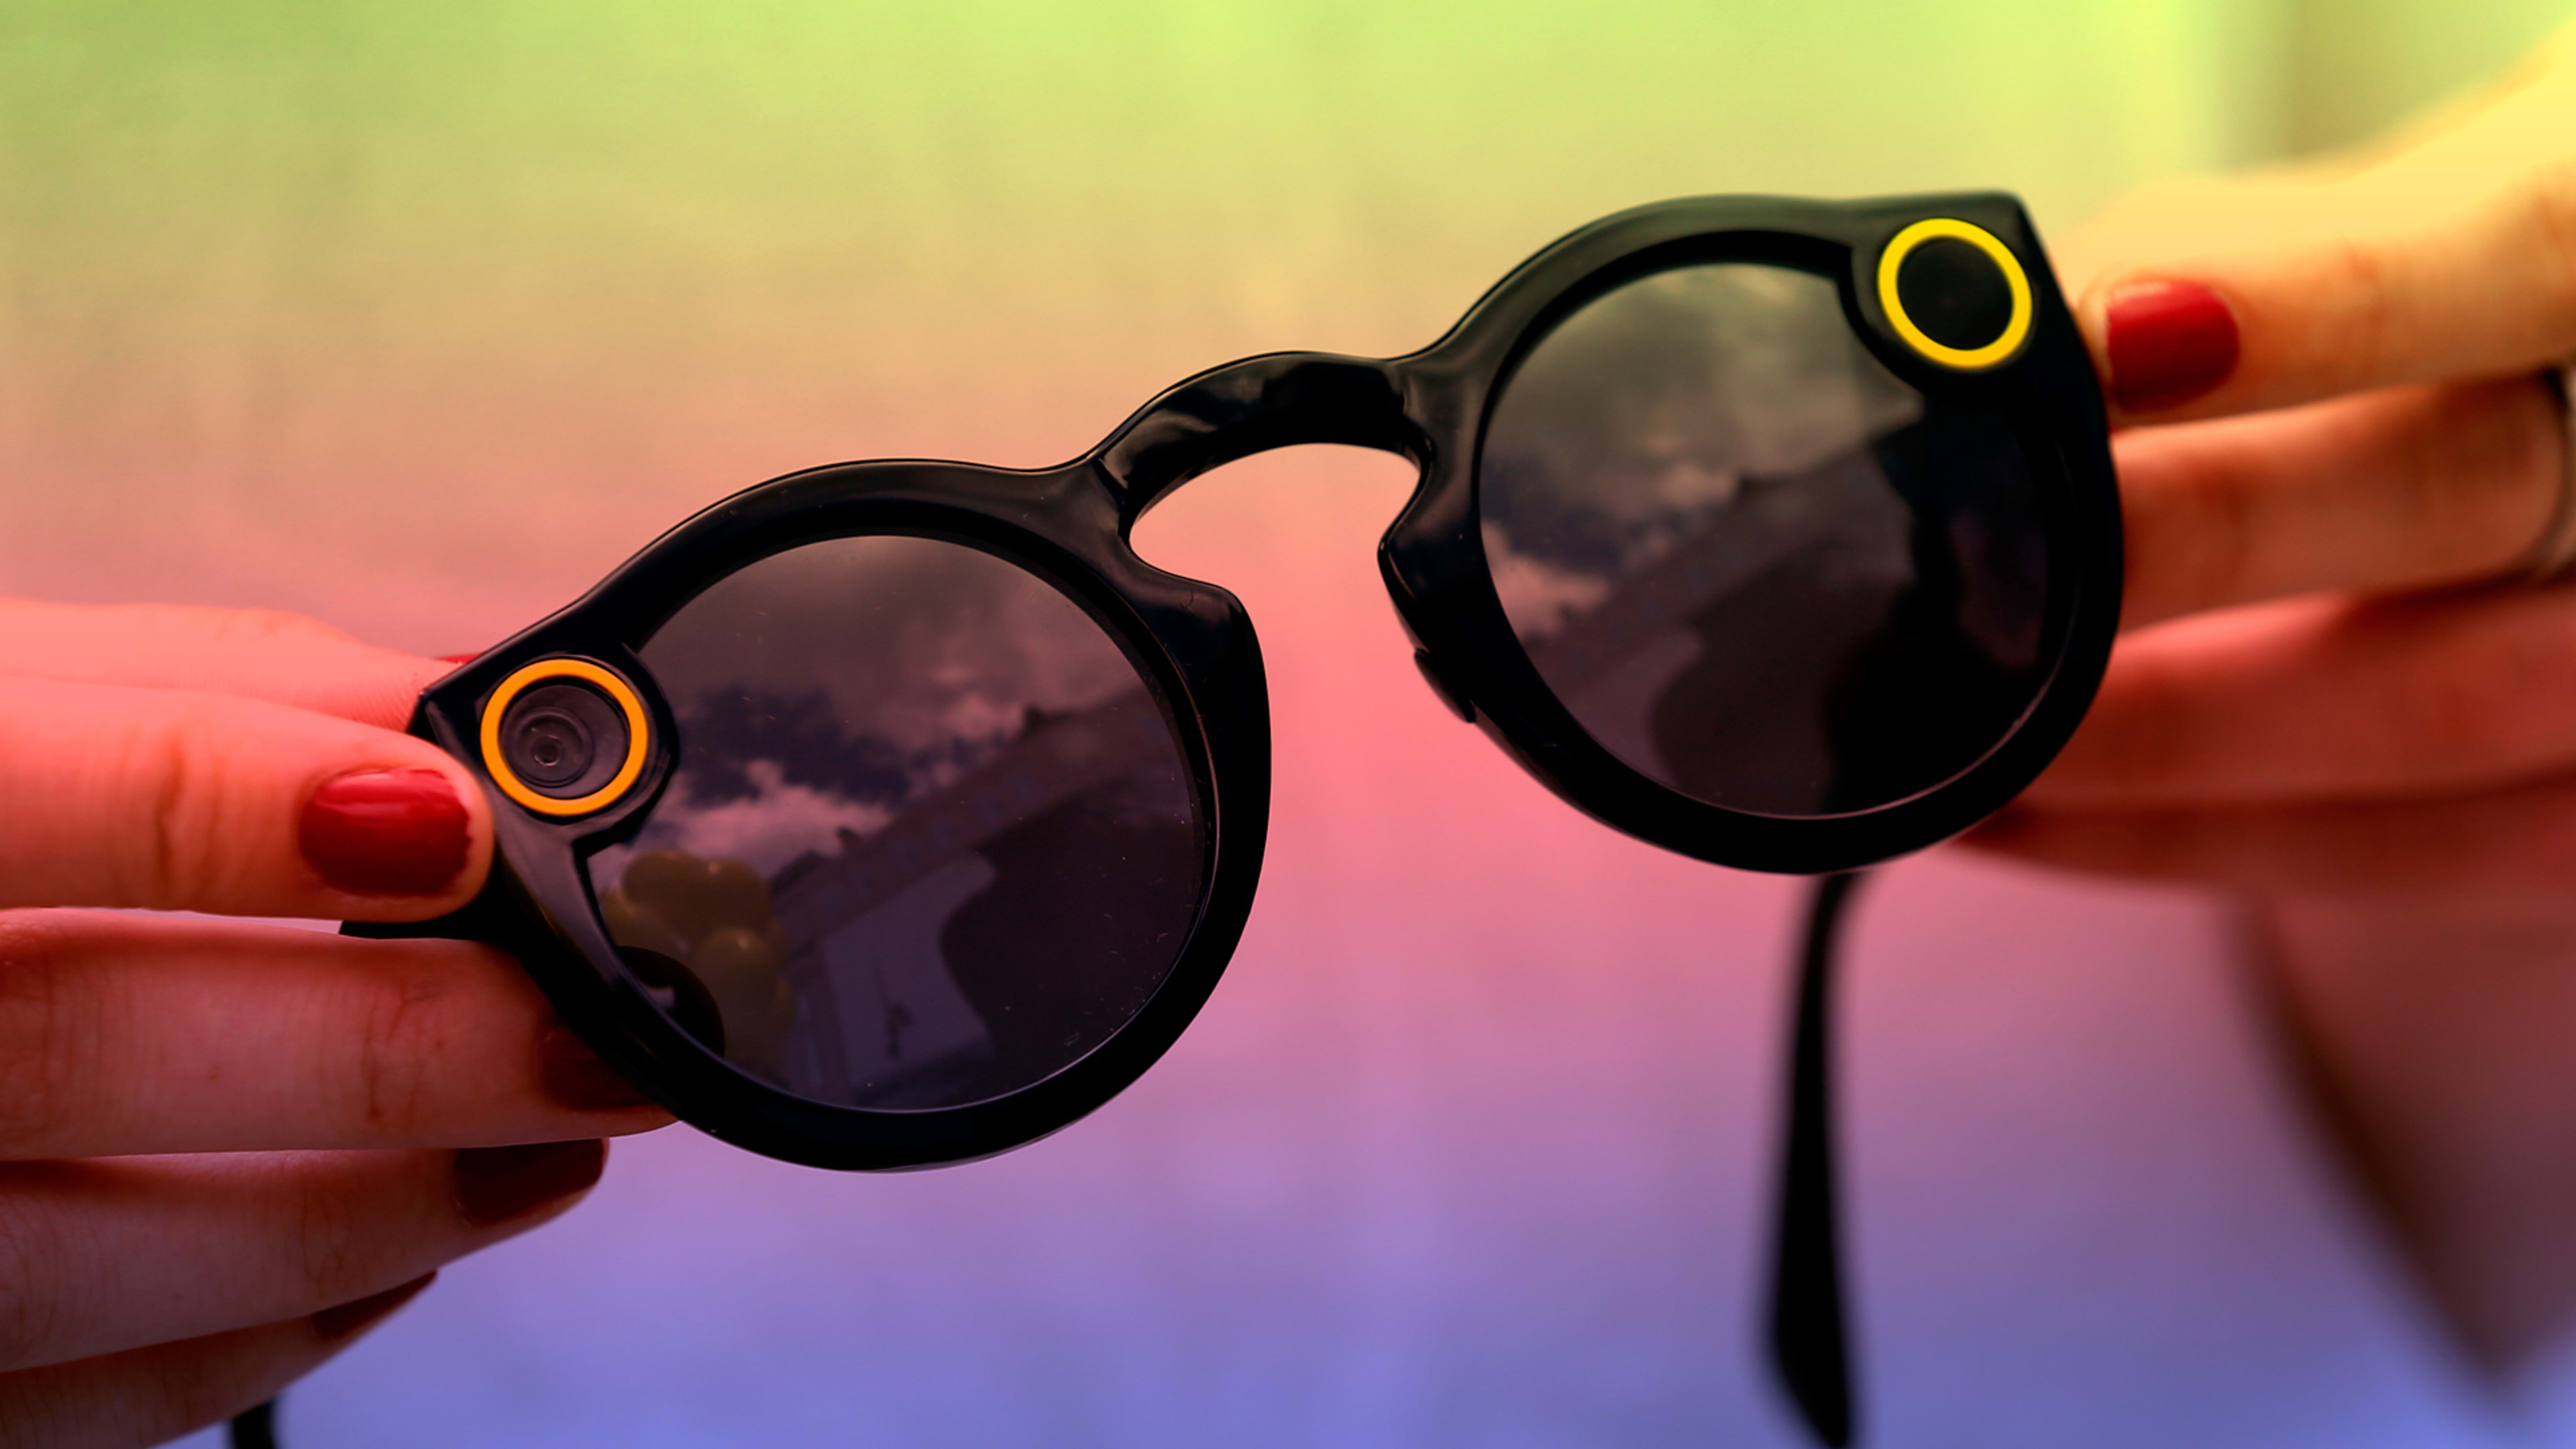 Snapchat has an interesting scheme to unload some of those extra Spectacles